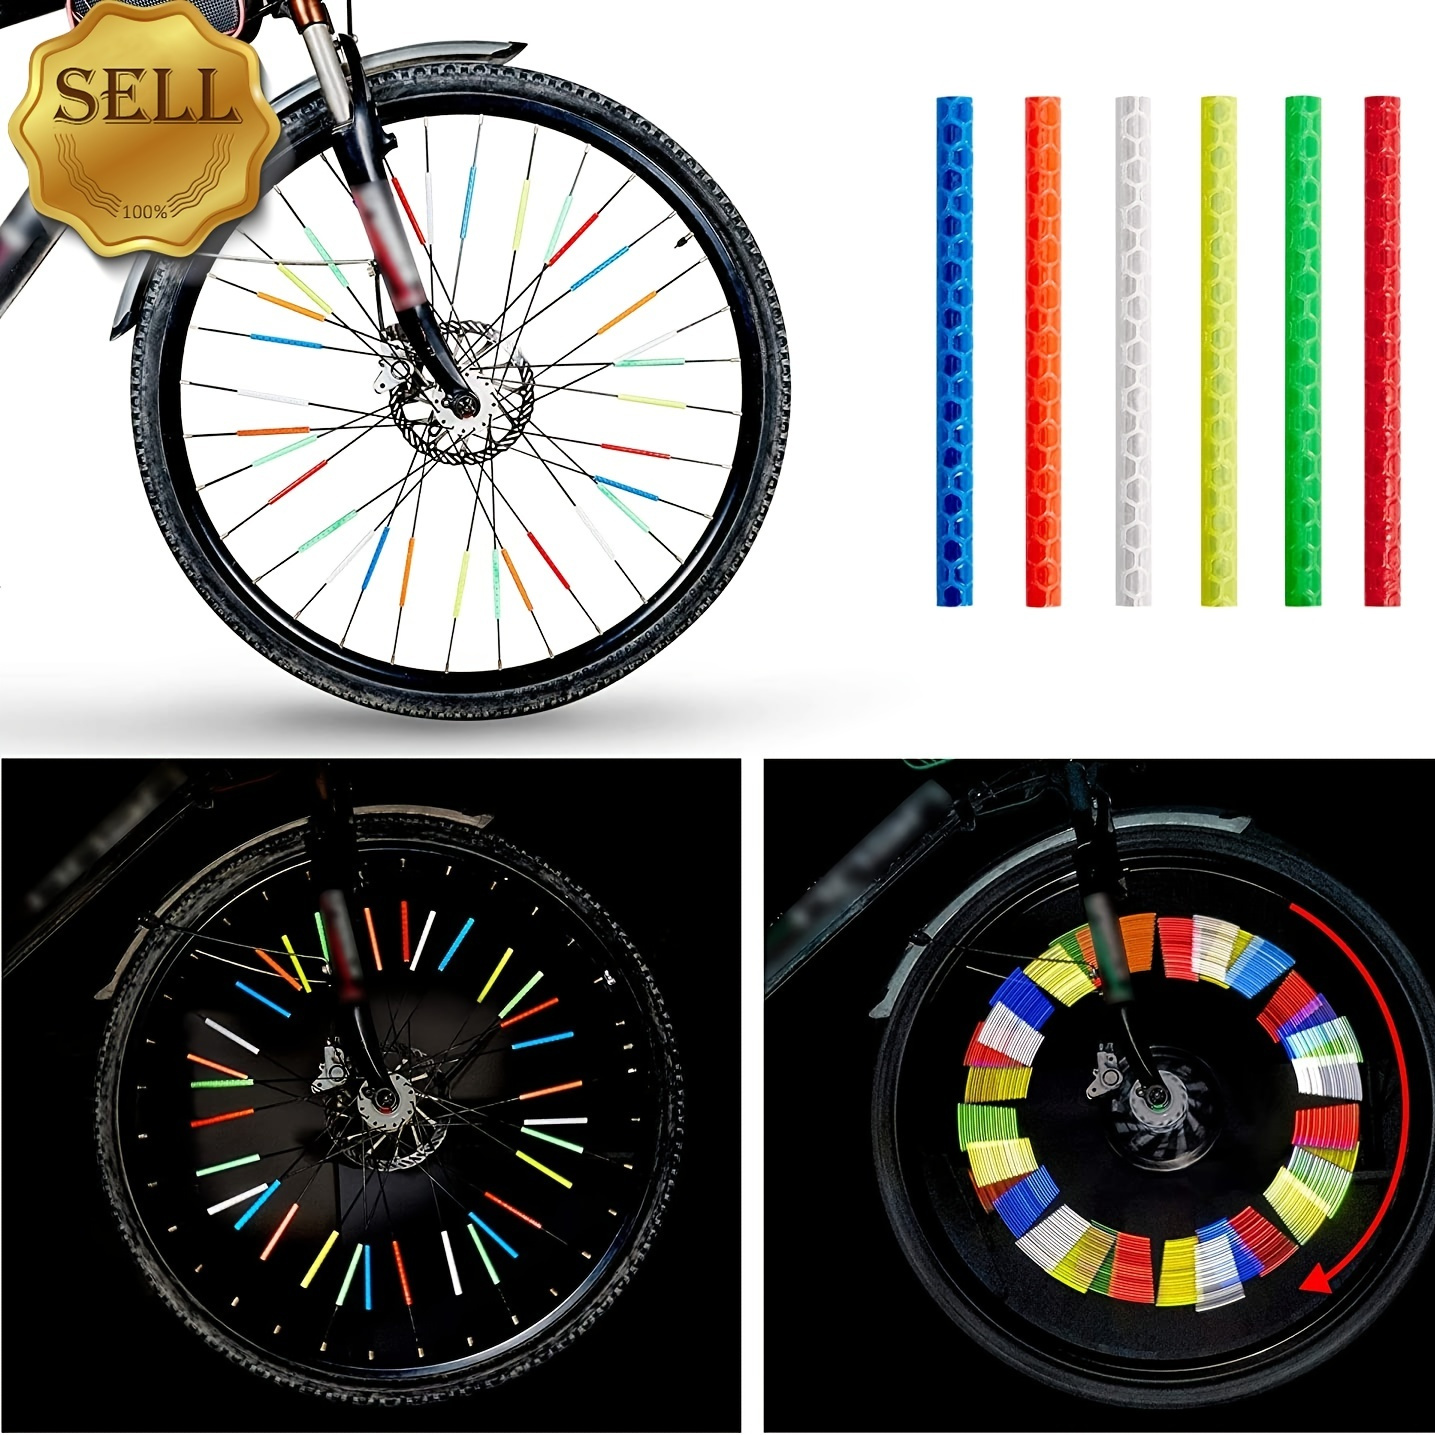 COOLHUBCAPS Glow Spokes Made with 3M Reflective Paint Fits Standard Bicycle  Spokes